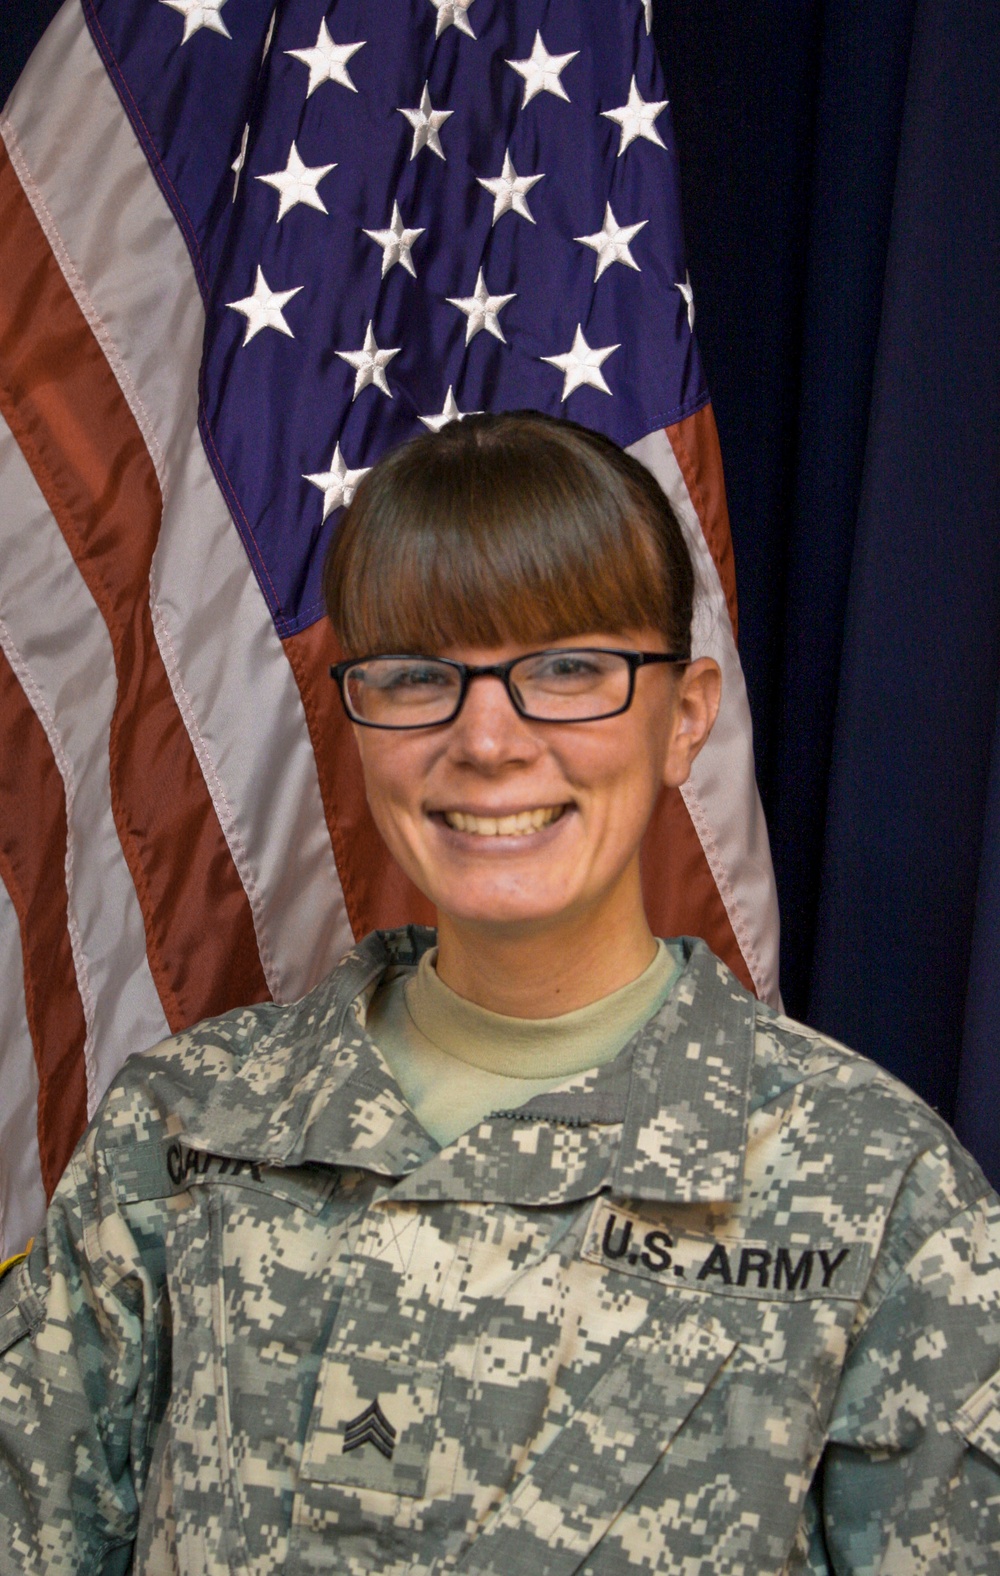 North Carolina Soldier takes on new responsibilities upon entering Army NCO Corps